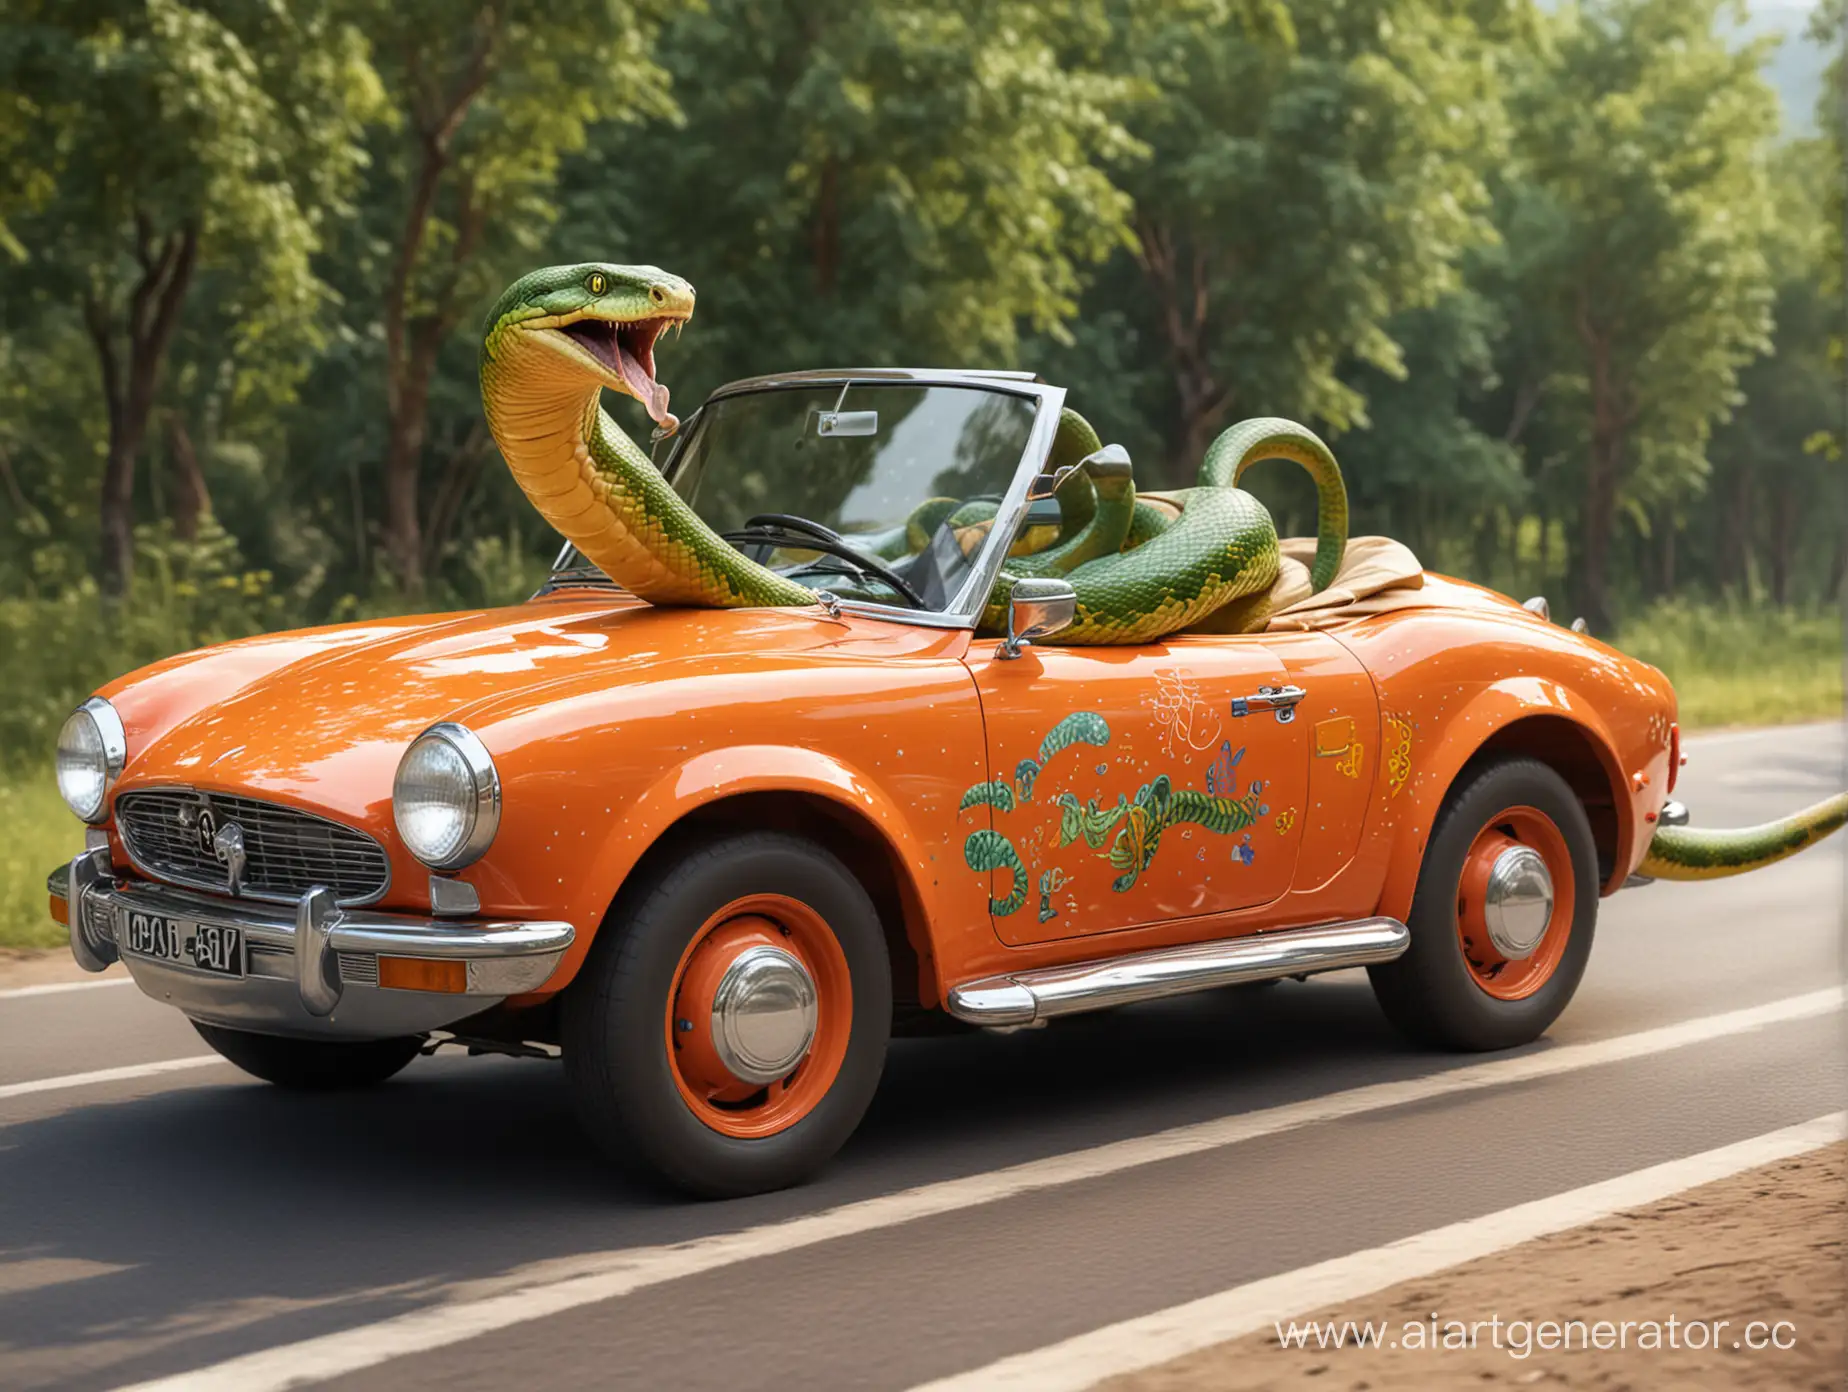 Cheerful-Snake-Riding-in-Car